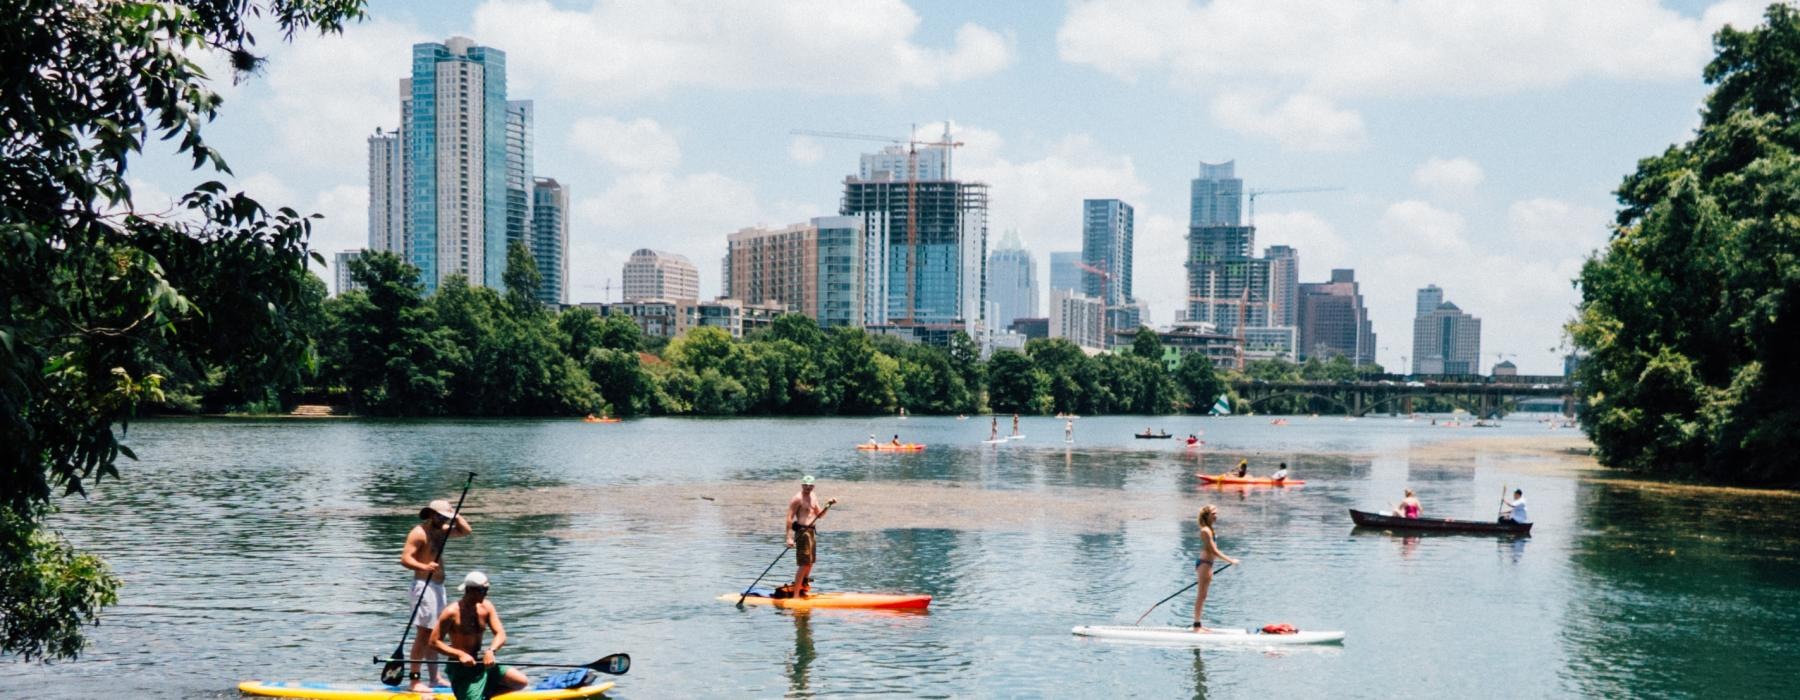 a group of people on paddle boards with a city in the background